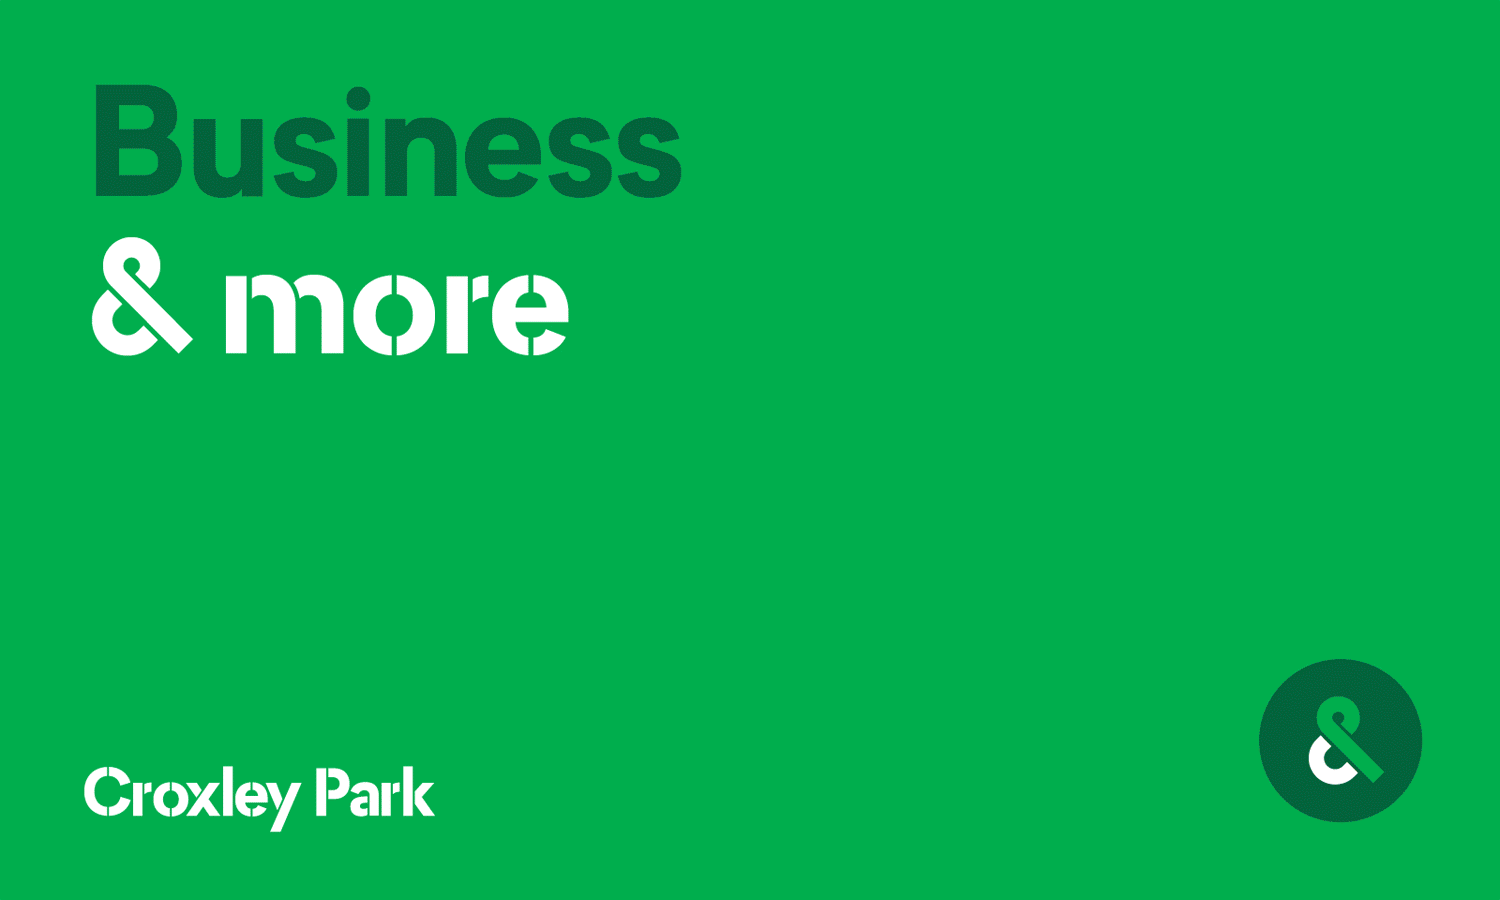 Copywriting and custom typeface by Blast for UK business park Croxley Park